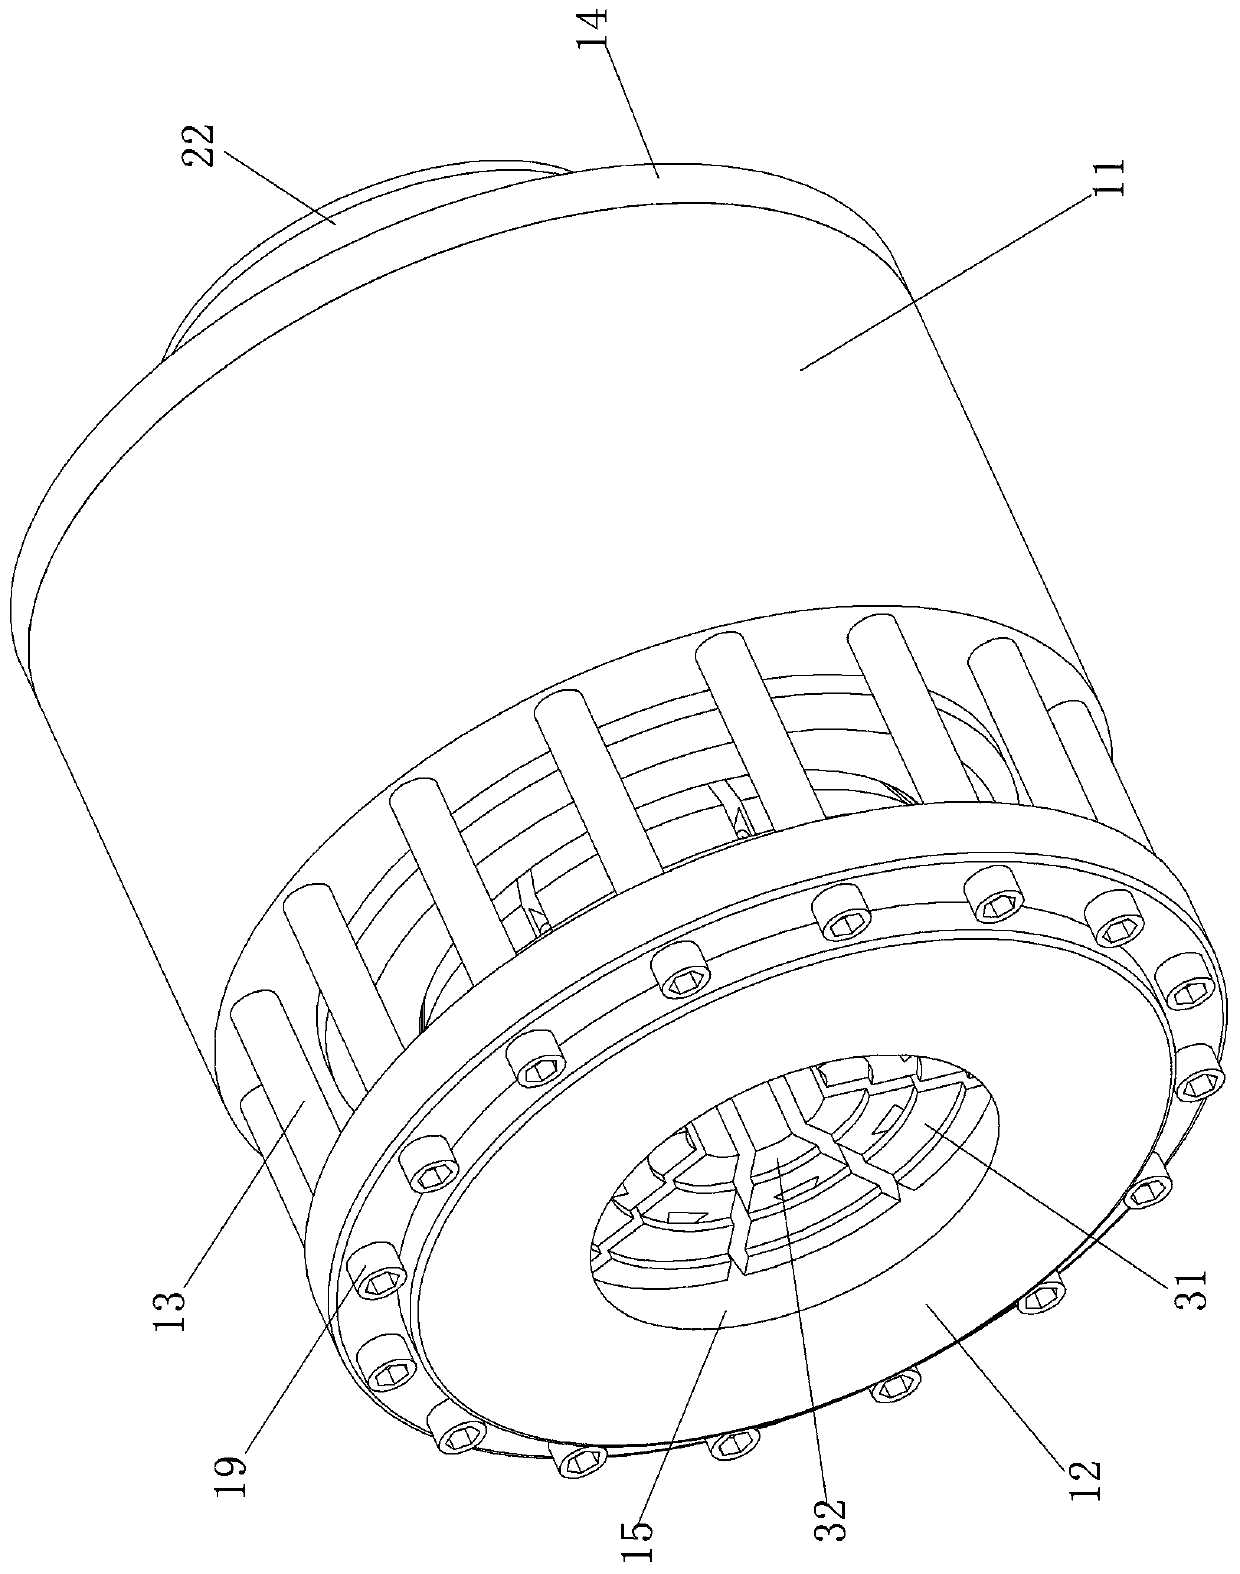 Hollowed-out pipe orifice shrinking device